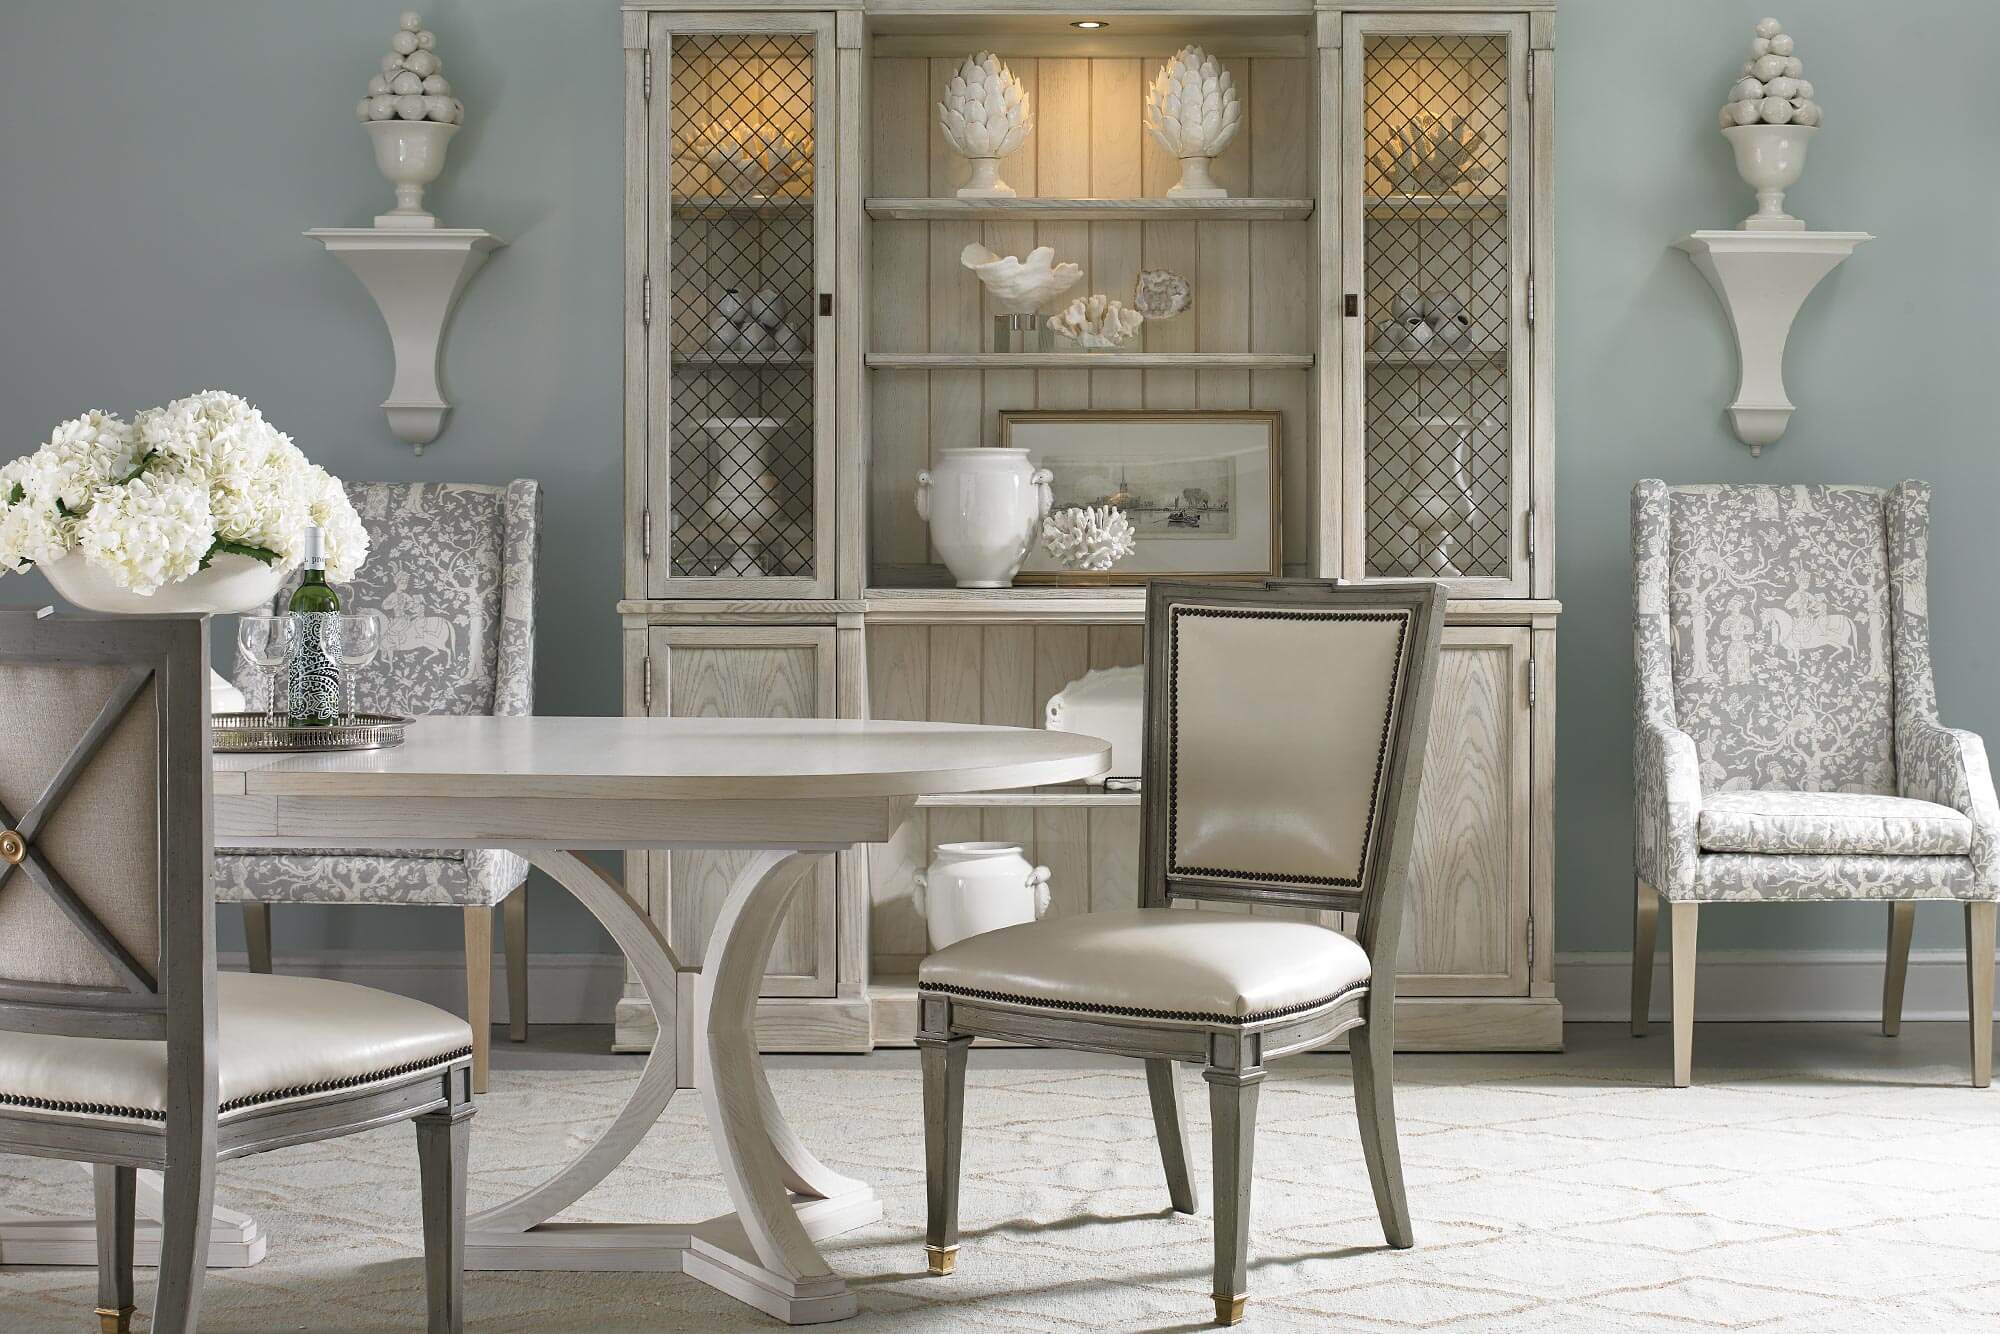 Hickory White settings to inspire your imagination